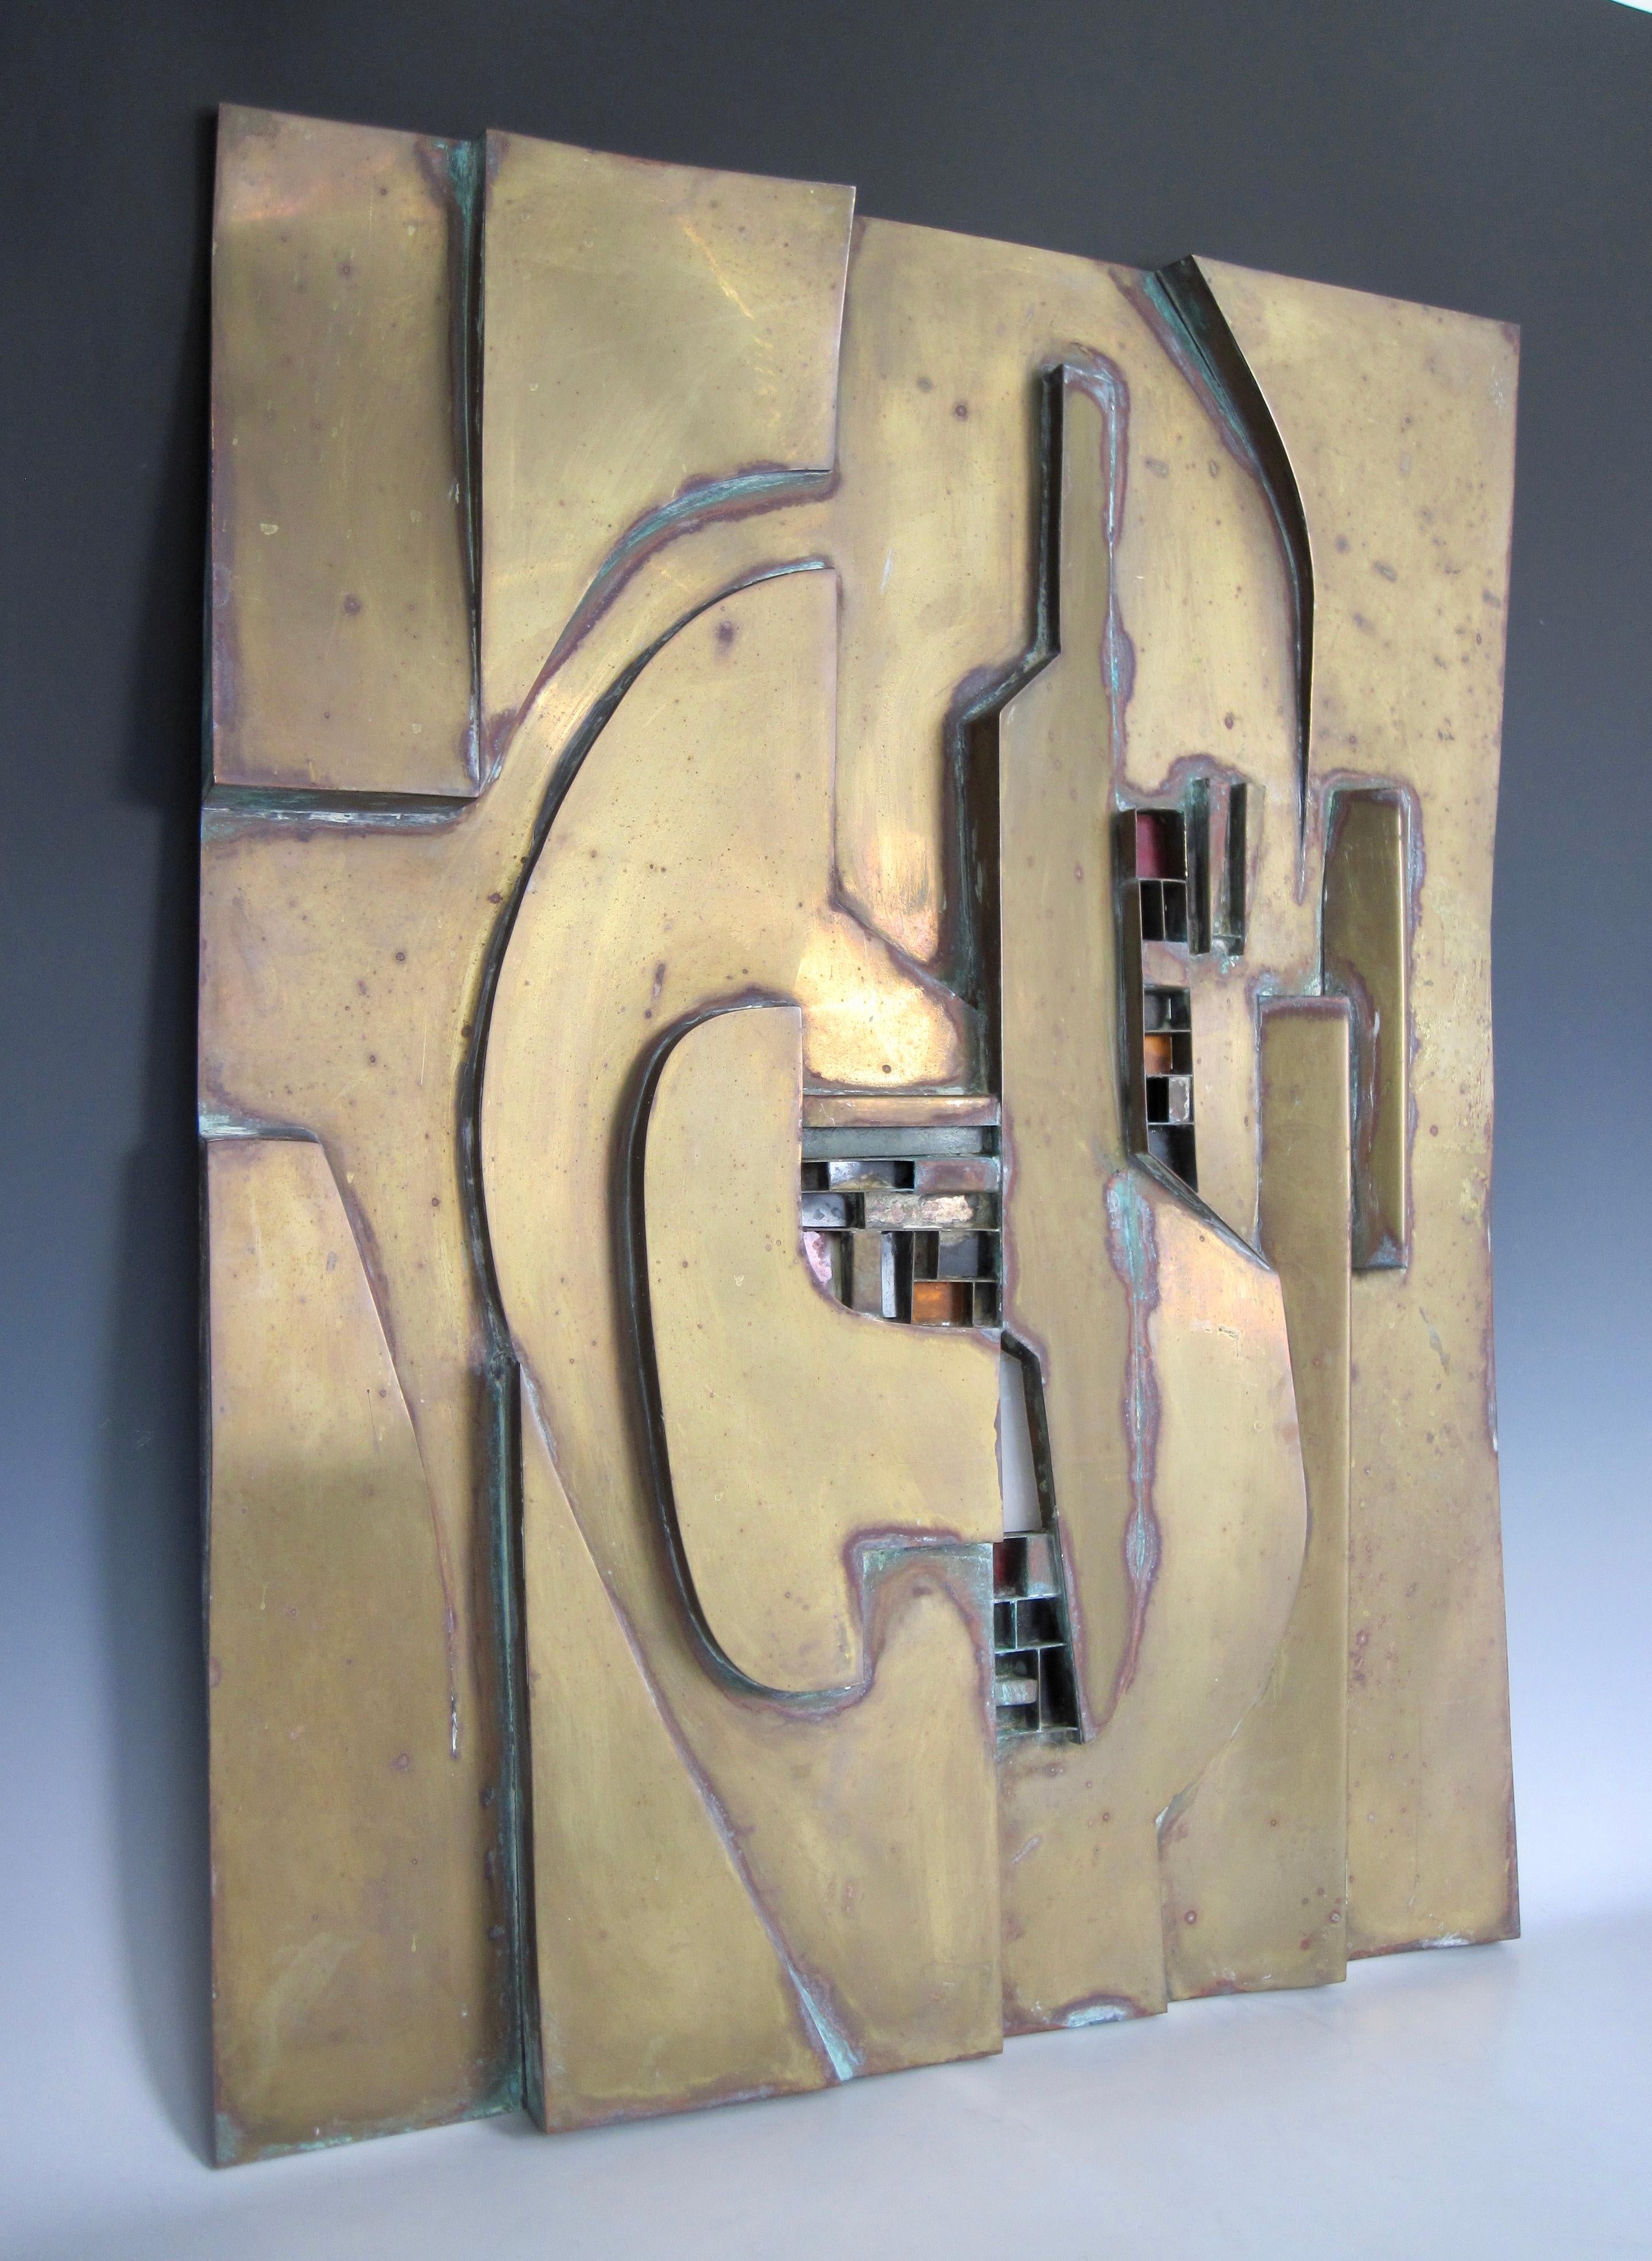 A brutalist brass sculpture of varying advanced and recessed geometric shapes. Fitted stained glass pieces in some smaller square and rectangular pockets. 
We love the geometric shapes with the brutalist architectural feel.
Wire hanger attached on